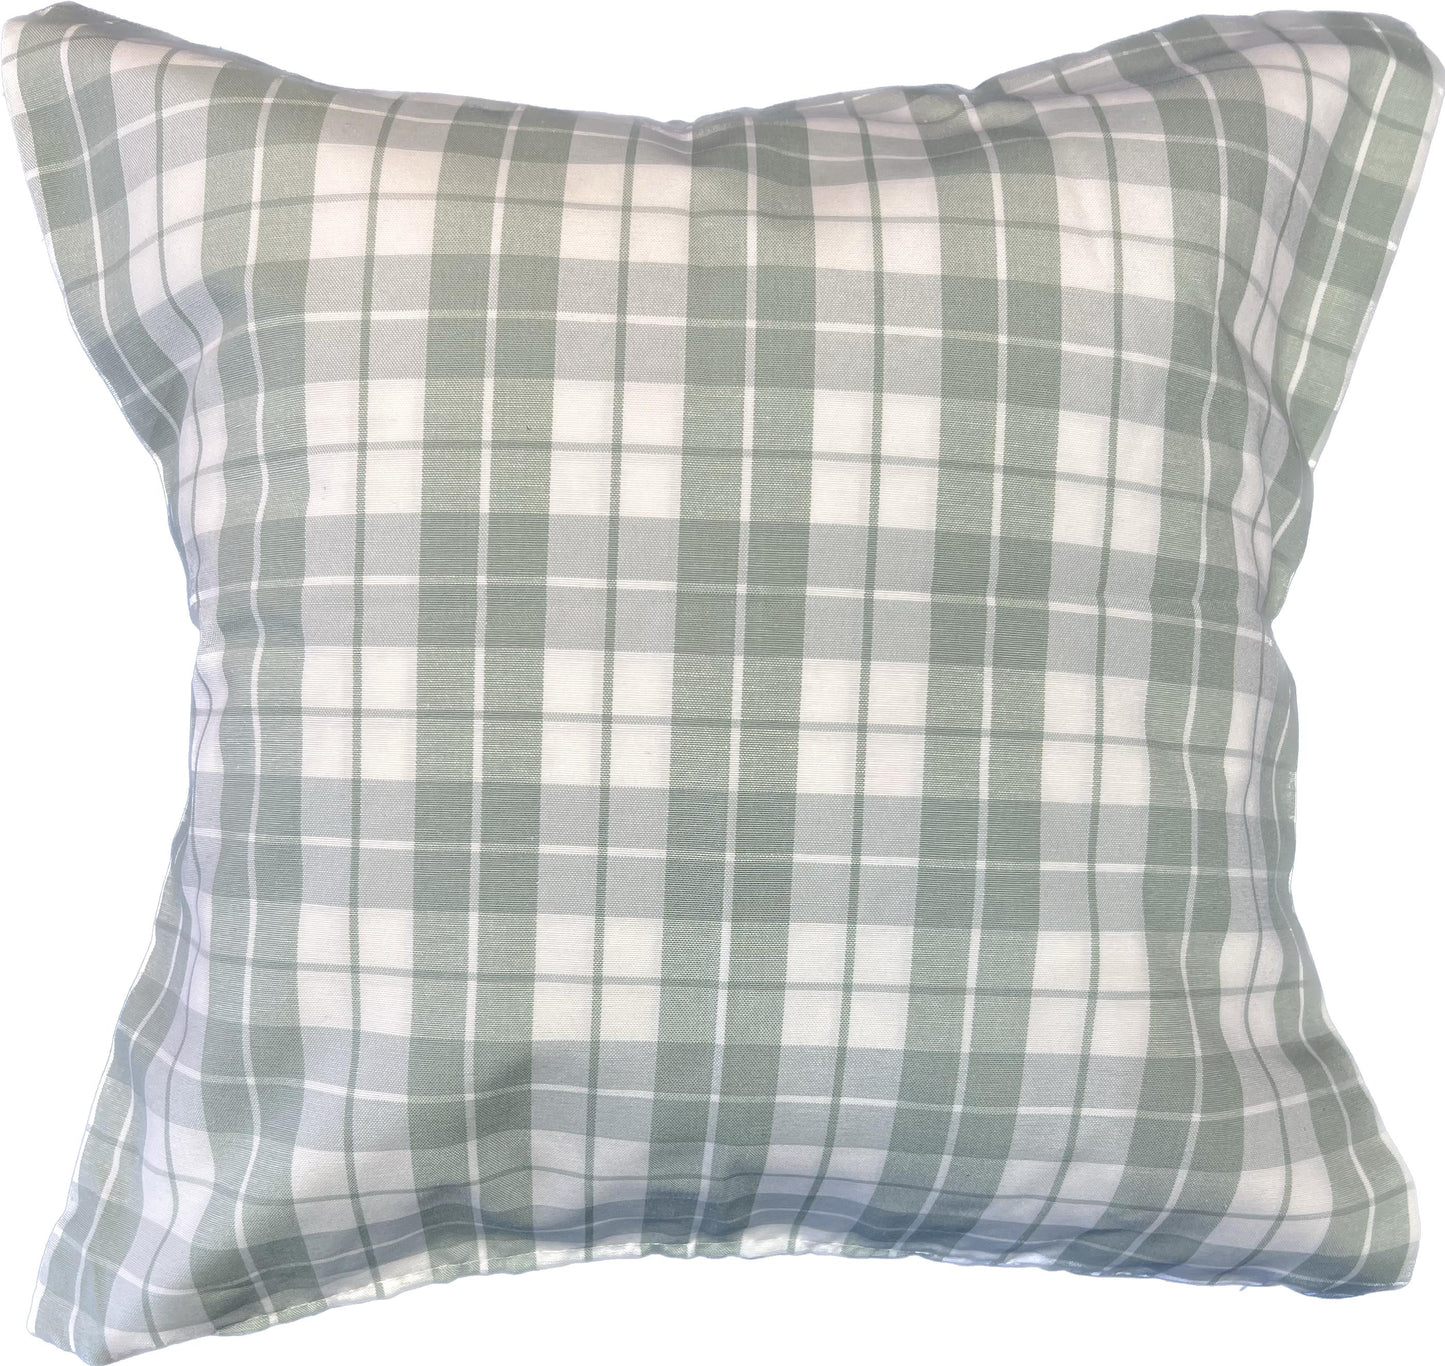 19"x20"   Plaid Pillow Cover*** Special Price***